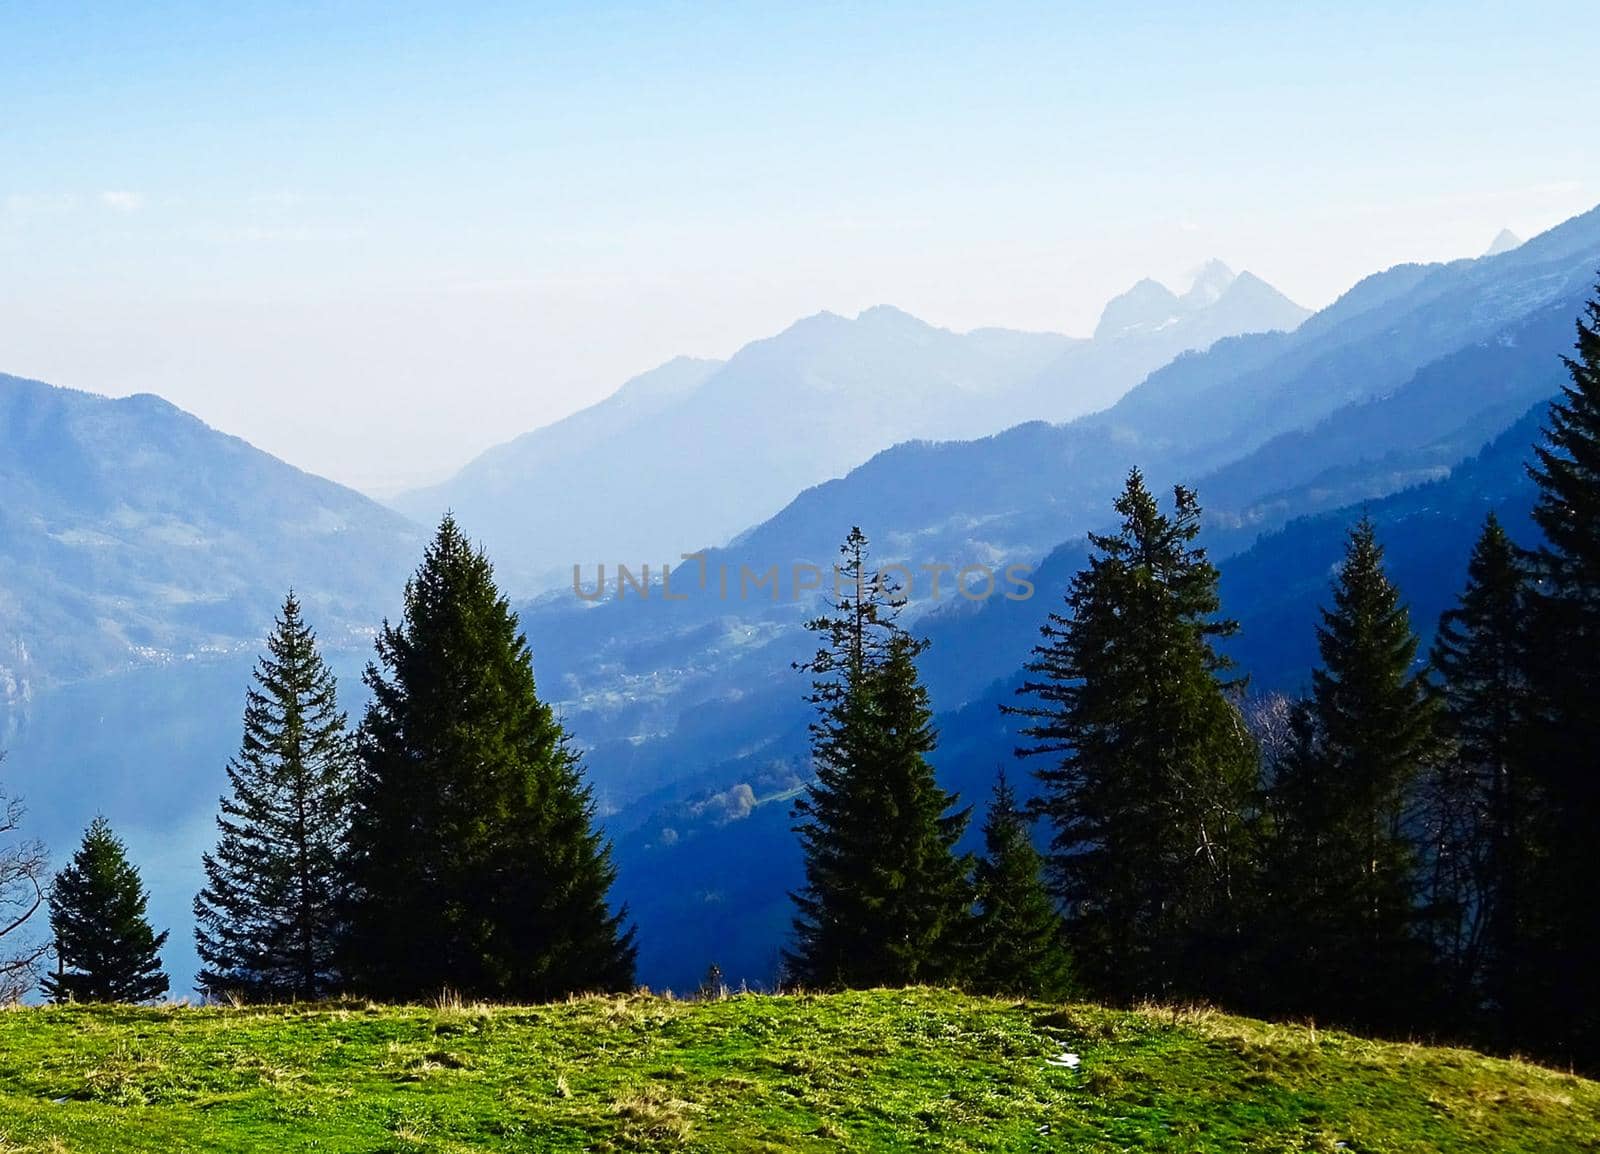 Beautiful pictures of Appenzell